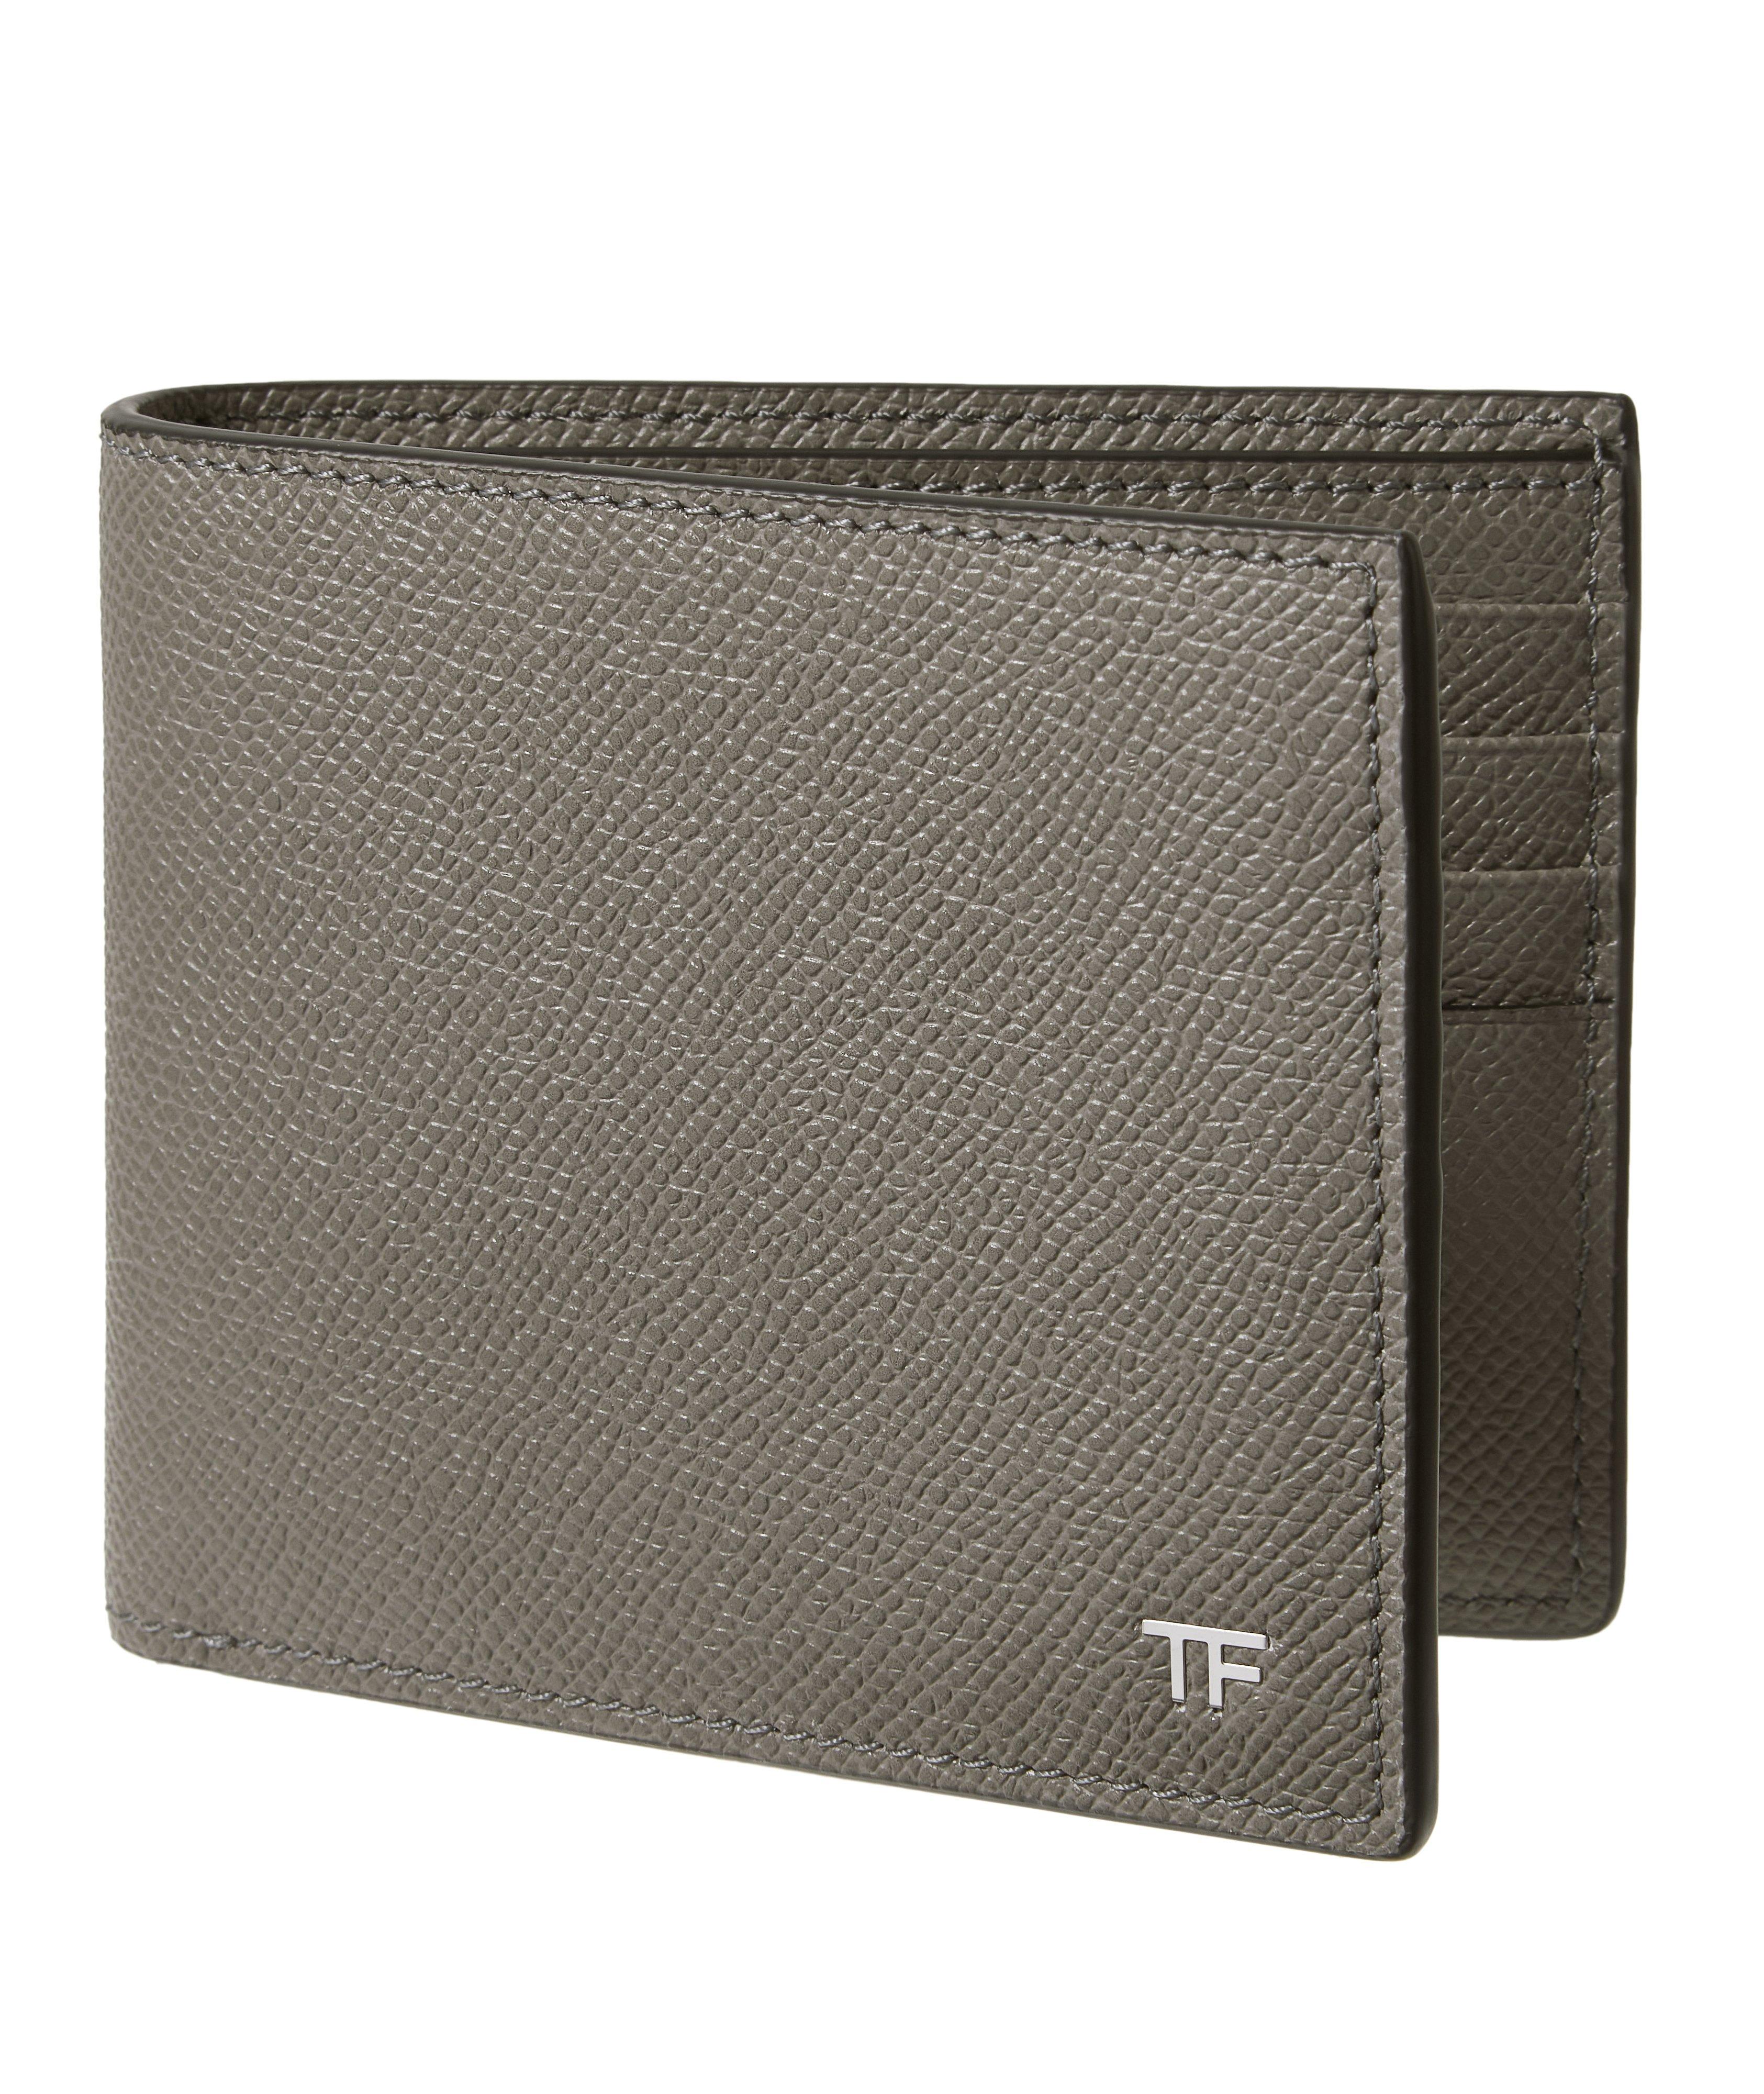 Pebbled Leather Bifold Wallet  image 0